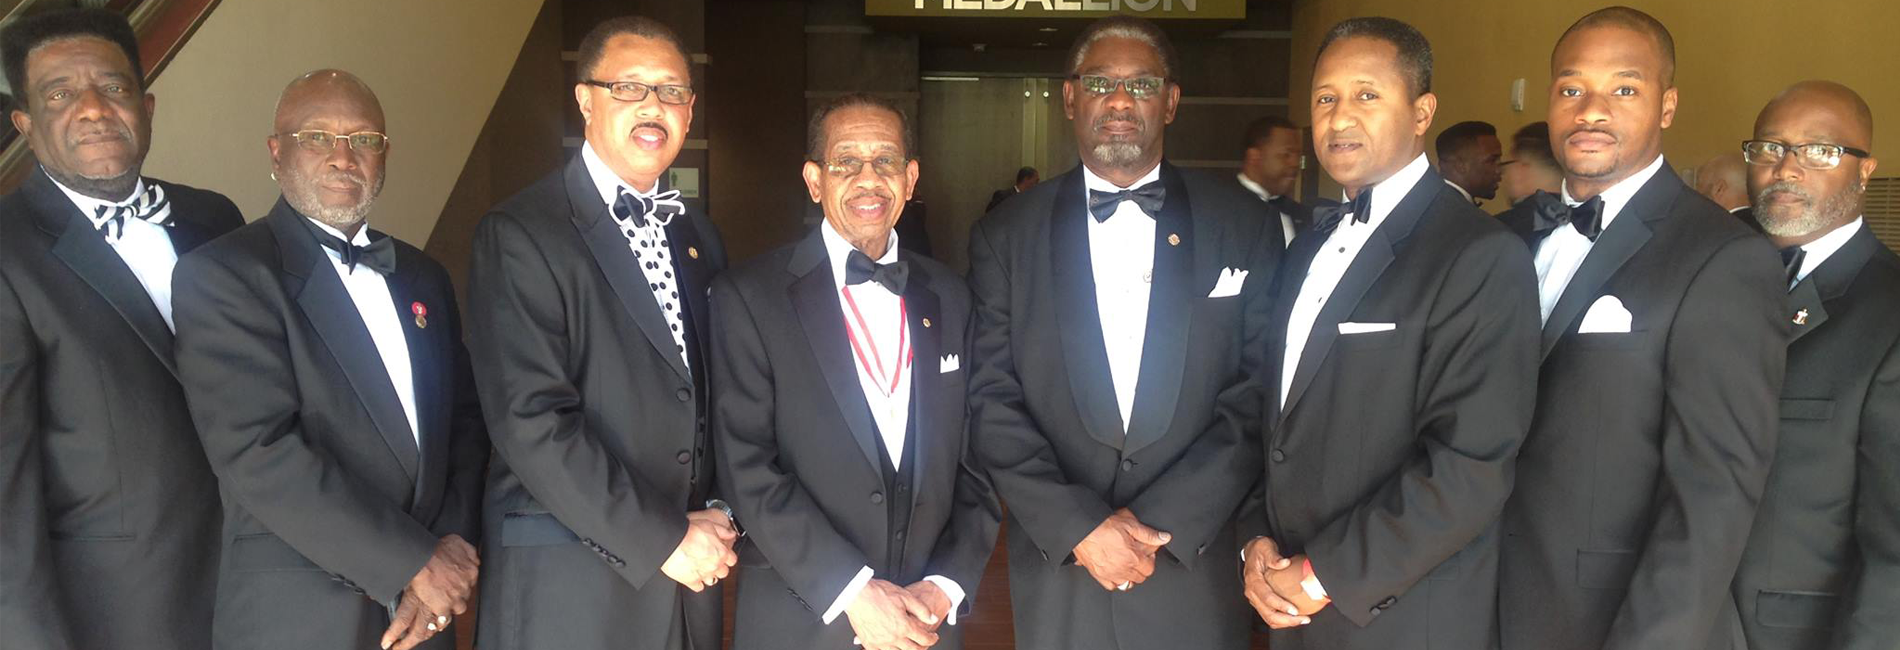 Memphis Alumni Officers with Grand Polemarch Thomas Battles, Jr.